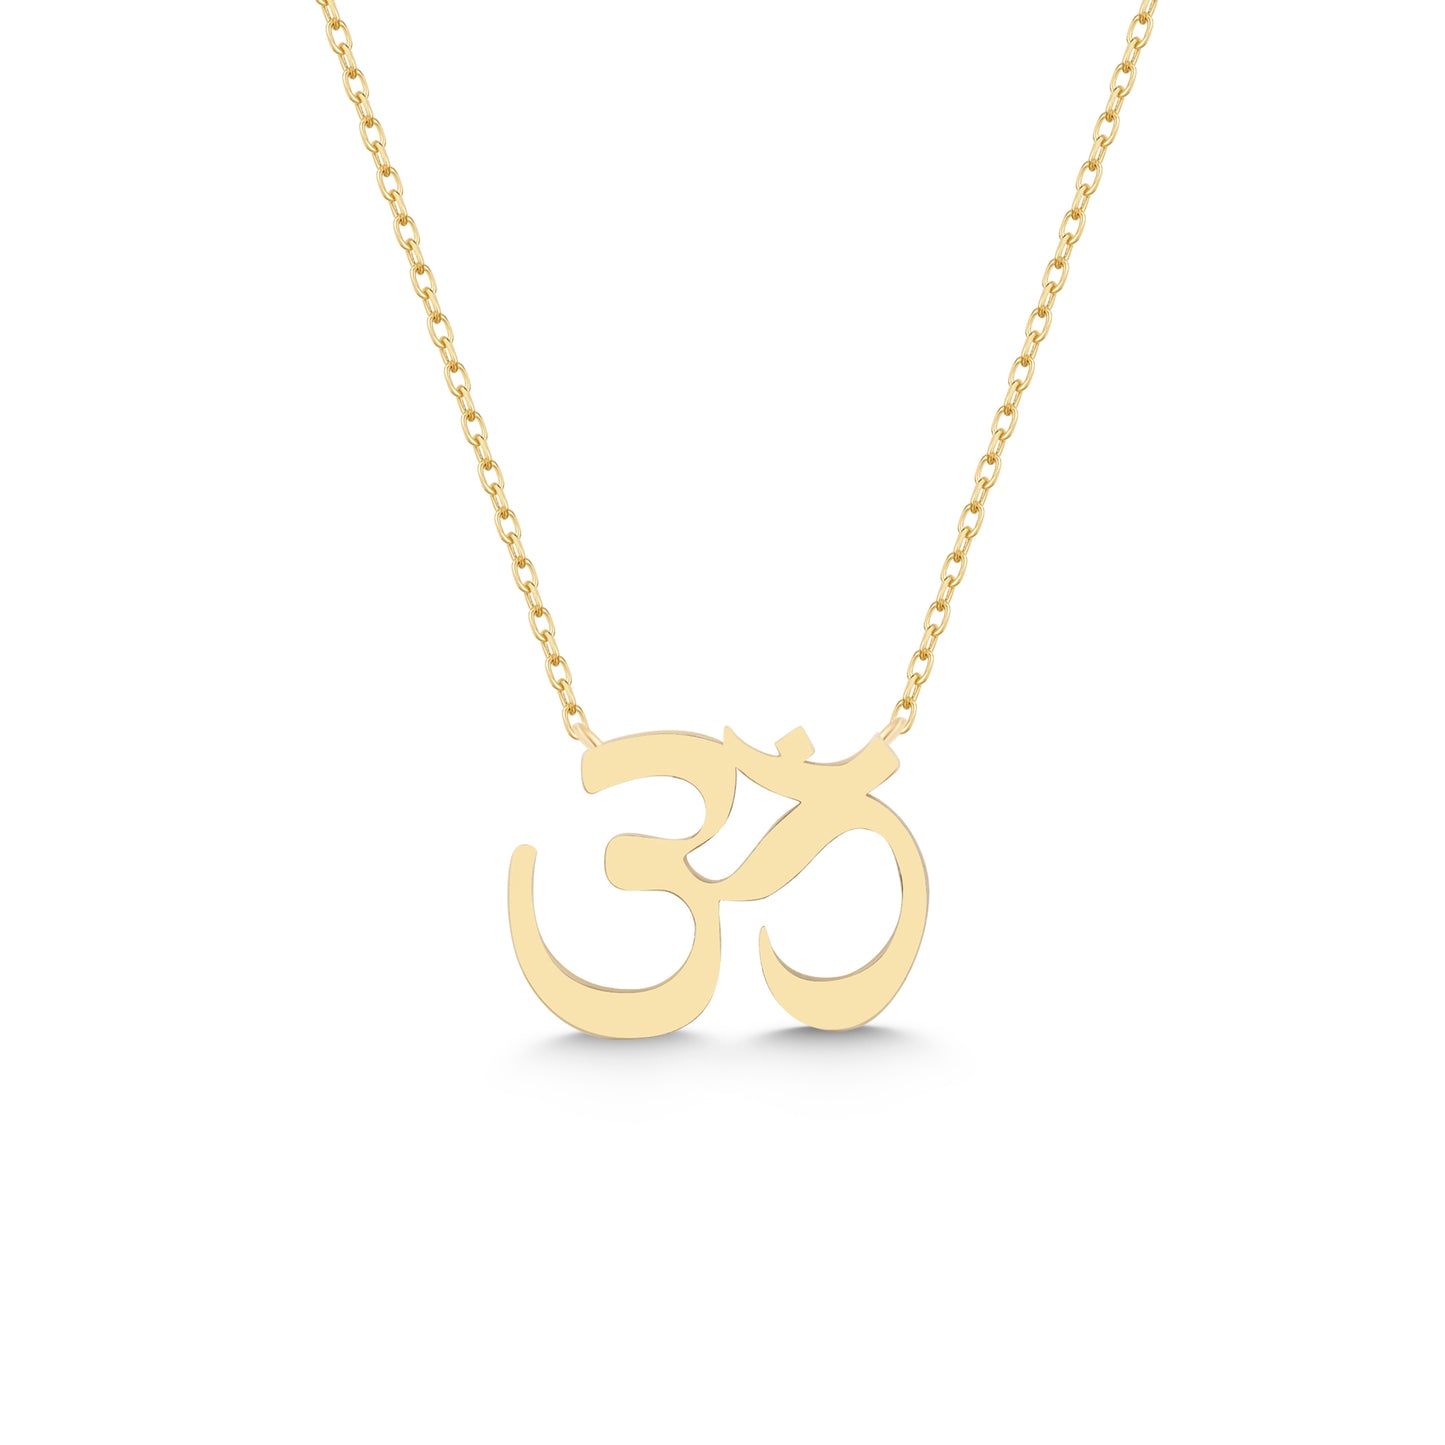 14k Gold Aum Necklace, Gold Ohm Necklace, Stacking Necklace, Handmade Necklace, Birthday Gift, Gift For Her